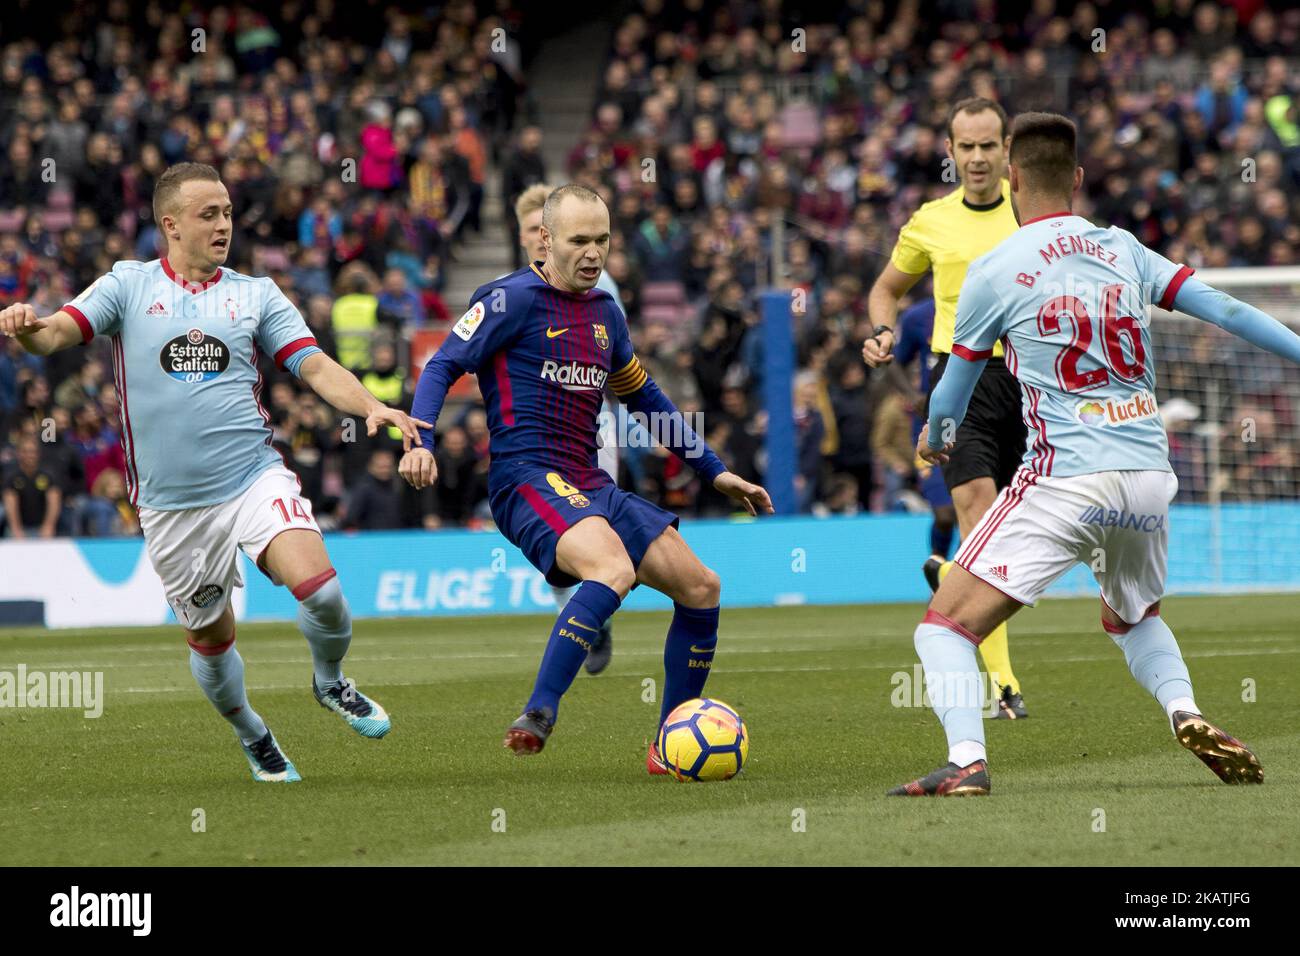 Andres Iniesta during the spanih league match between FC Barcelona and RC Celta de Vigo at the Camp Nou Stadium in Barcelona, Catalonia, Spain (Photo by Miquel Llop/NurPhoto) Stock Photo